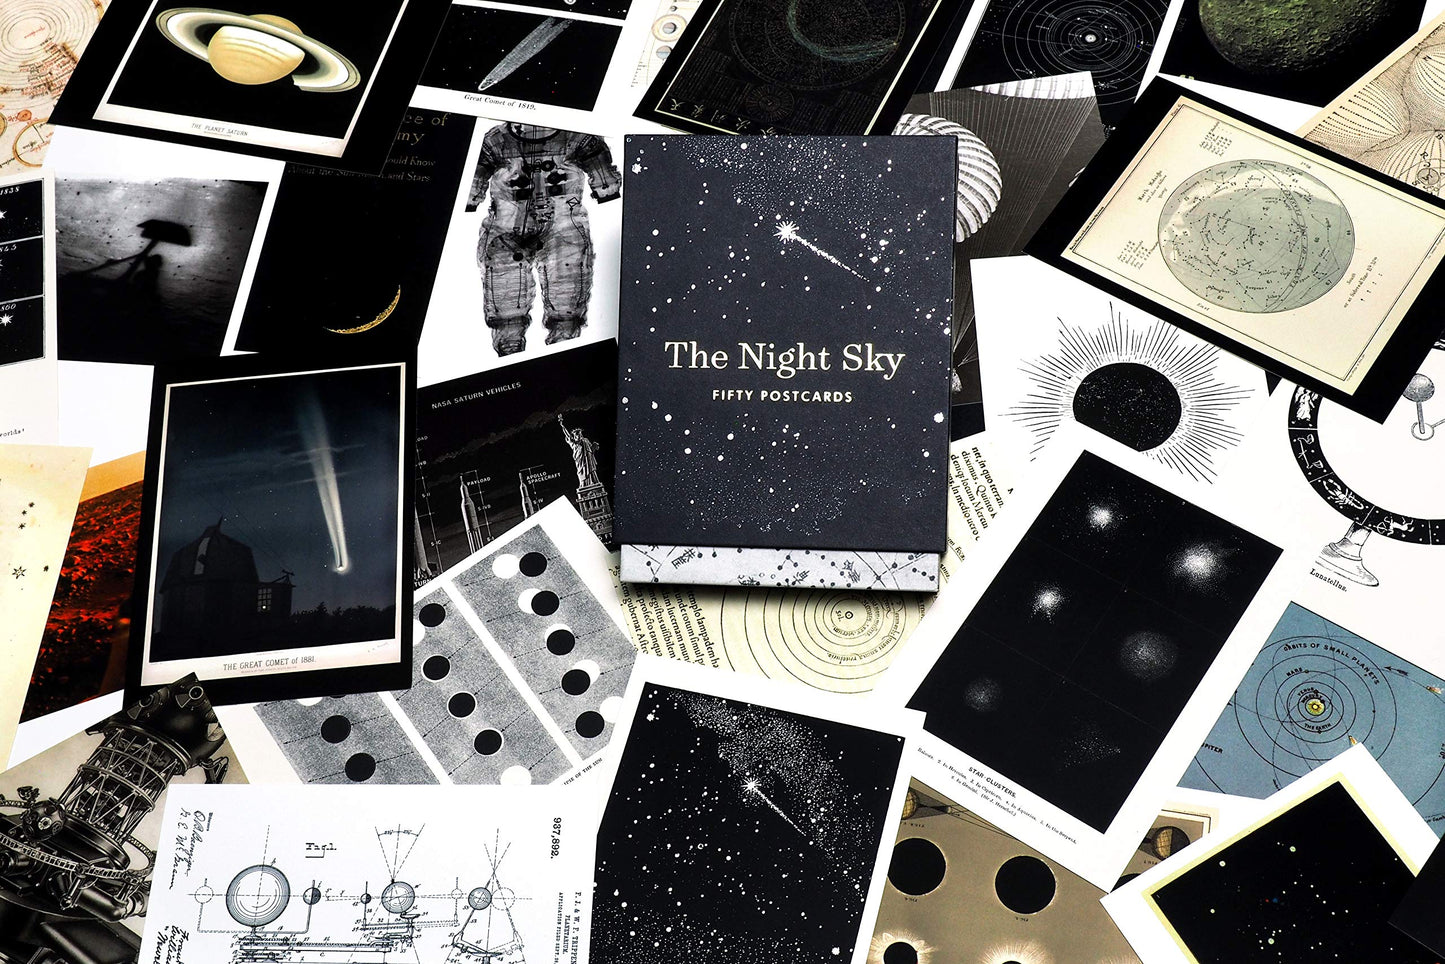 The Night Sky: Fifty Postcards